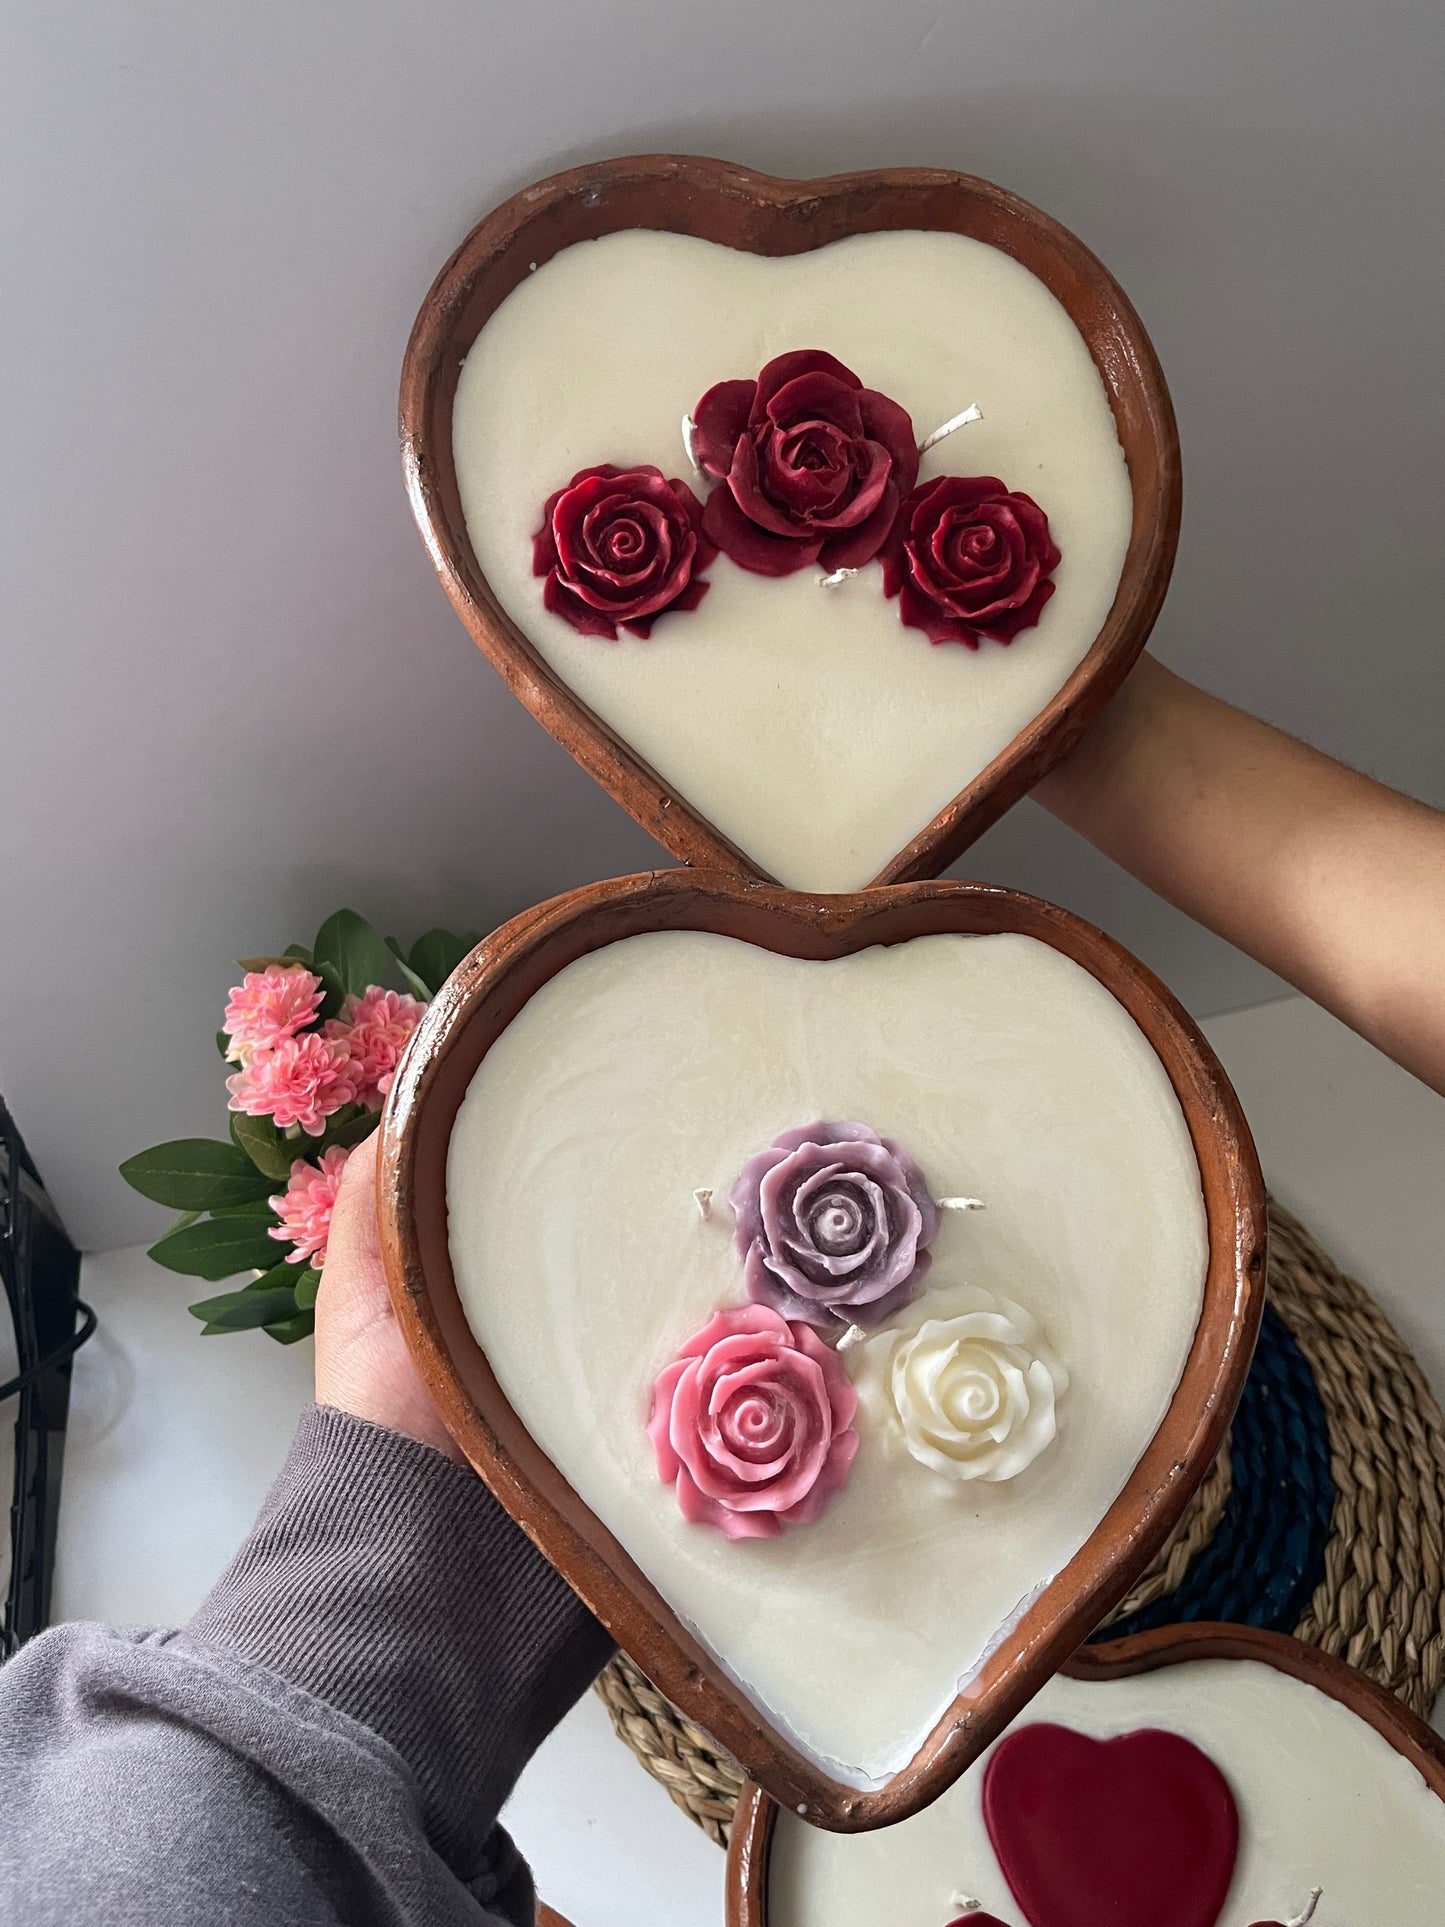 Mother’s Day Sale! Vela Amor Eterno/EverAfter heart candle/soy wax candle/handmade/hand poured/mexico candle/unscented candle/valentines gift/Mother’s Day gift